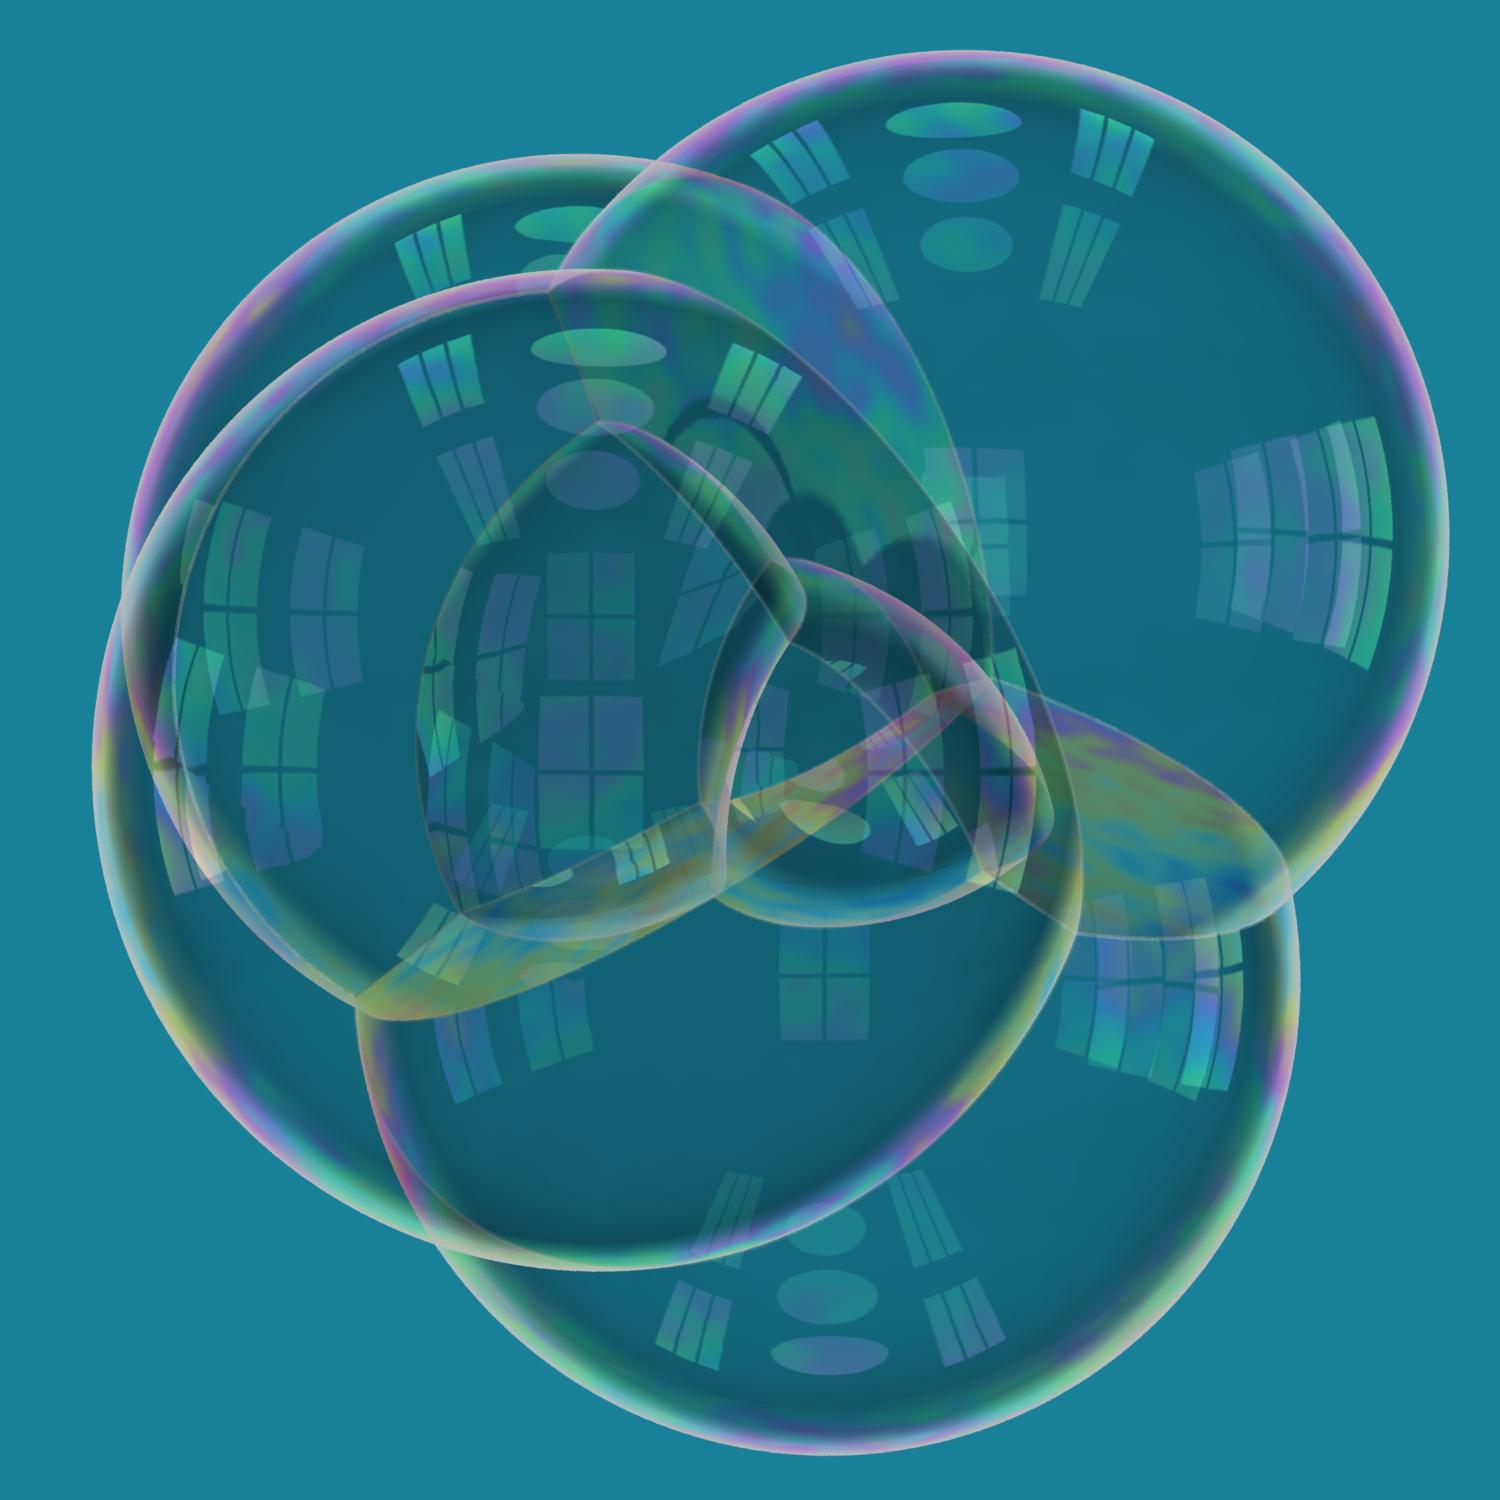 Image for entry 'Tetra6: Nonspherical Bubbles'